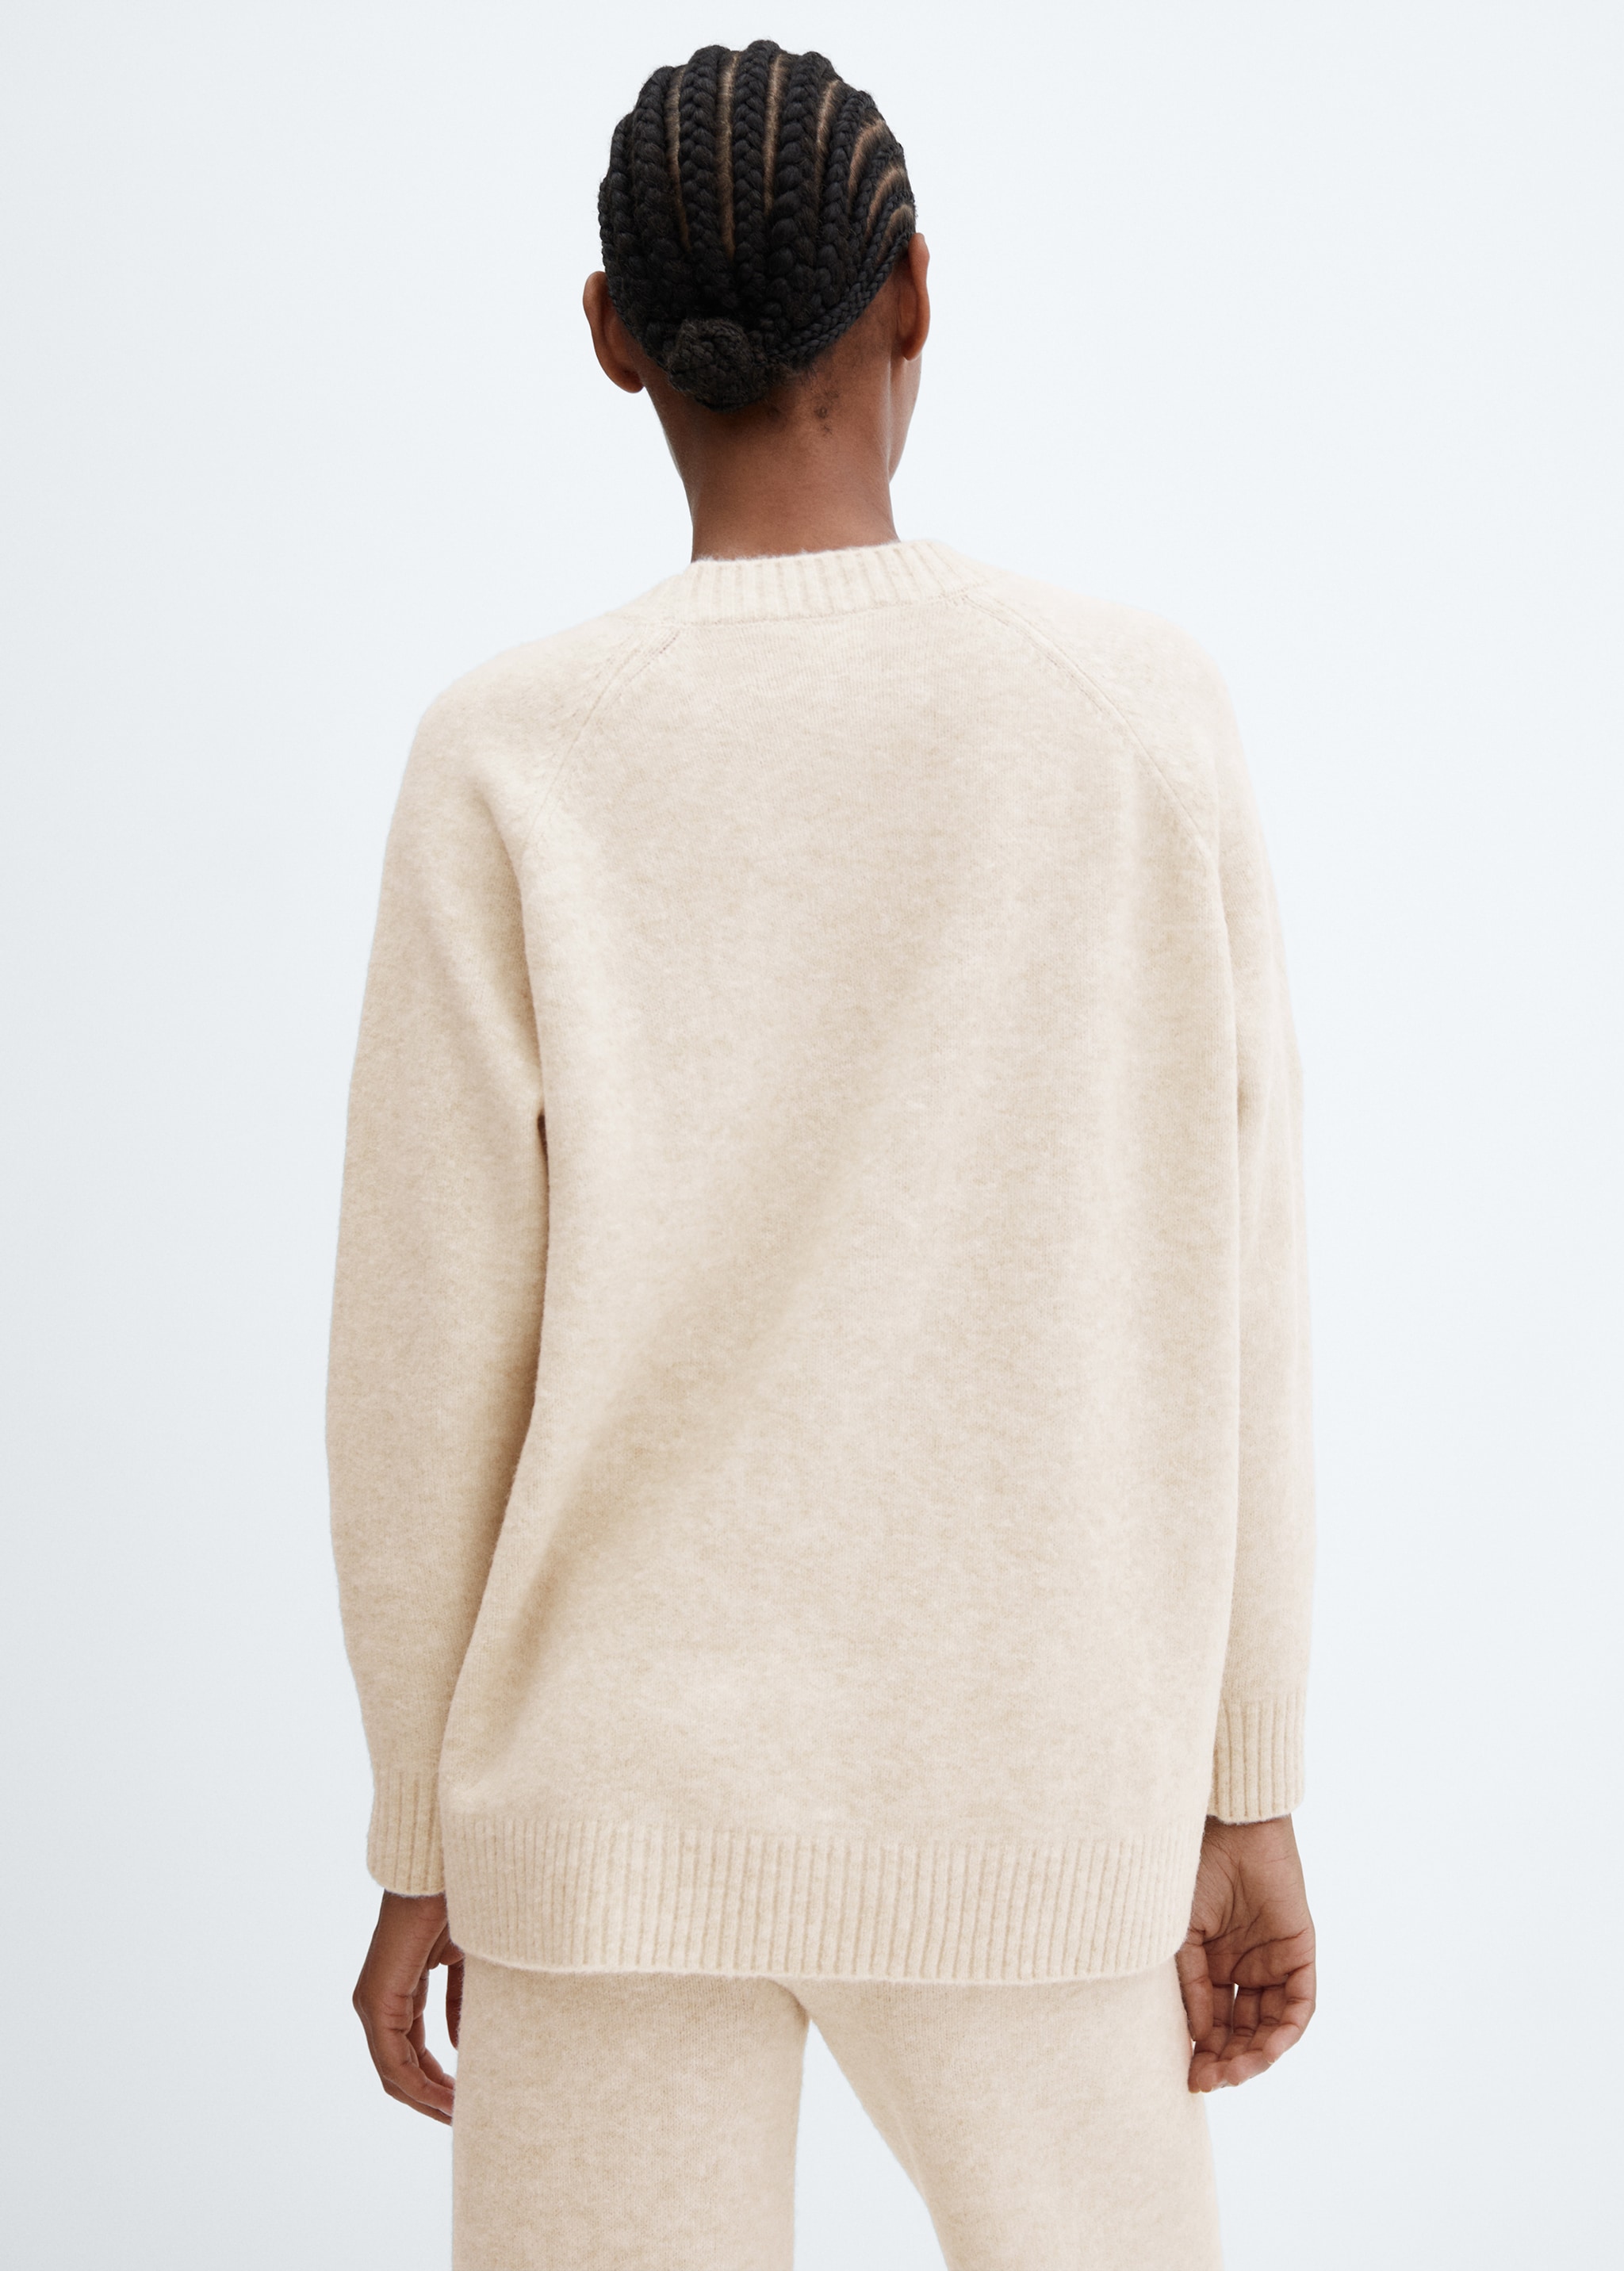 Oversize knit sweater - Reverse of the article